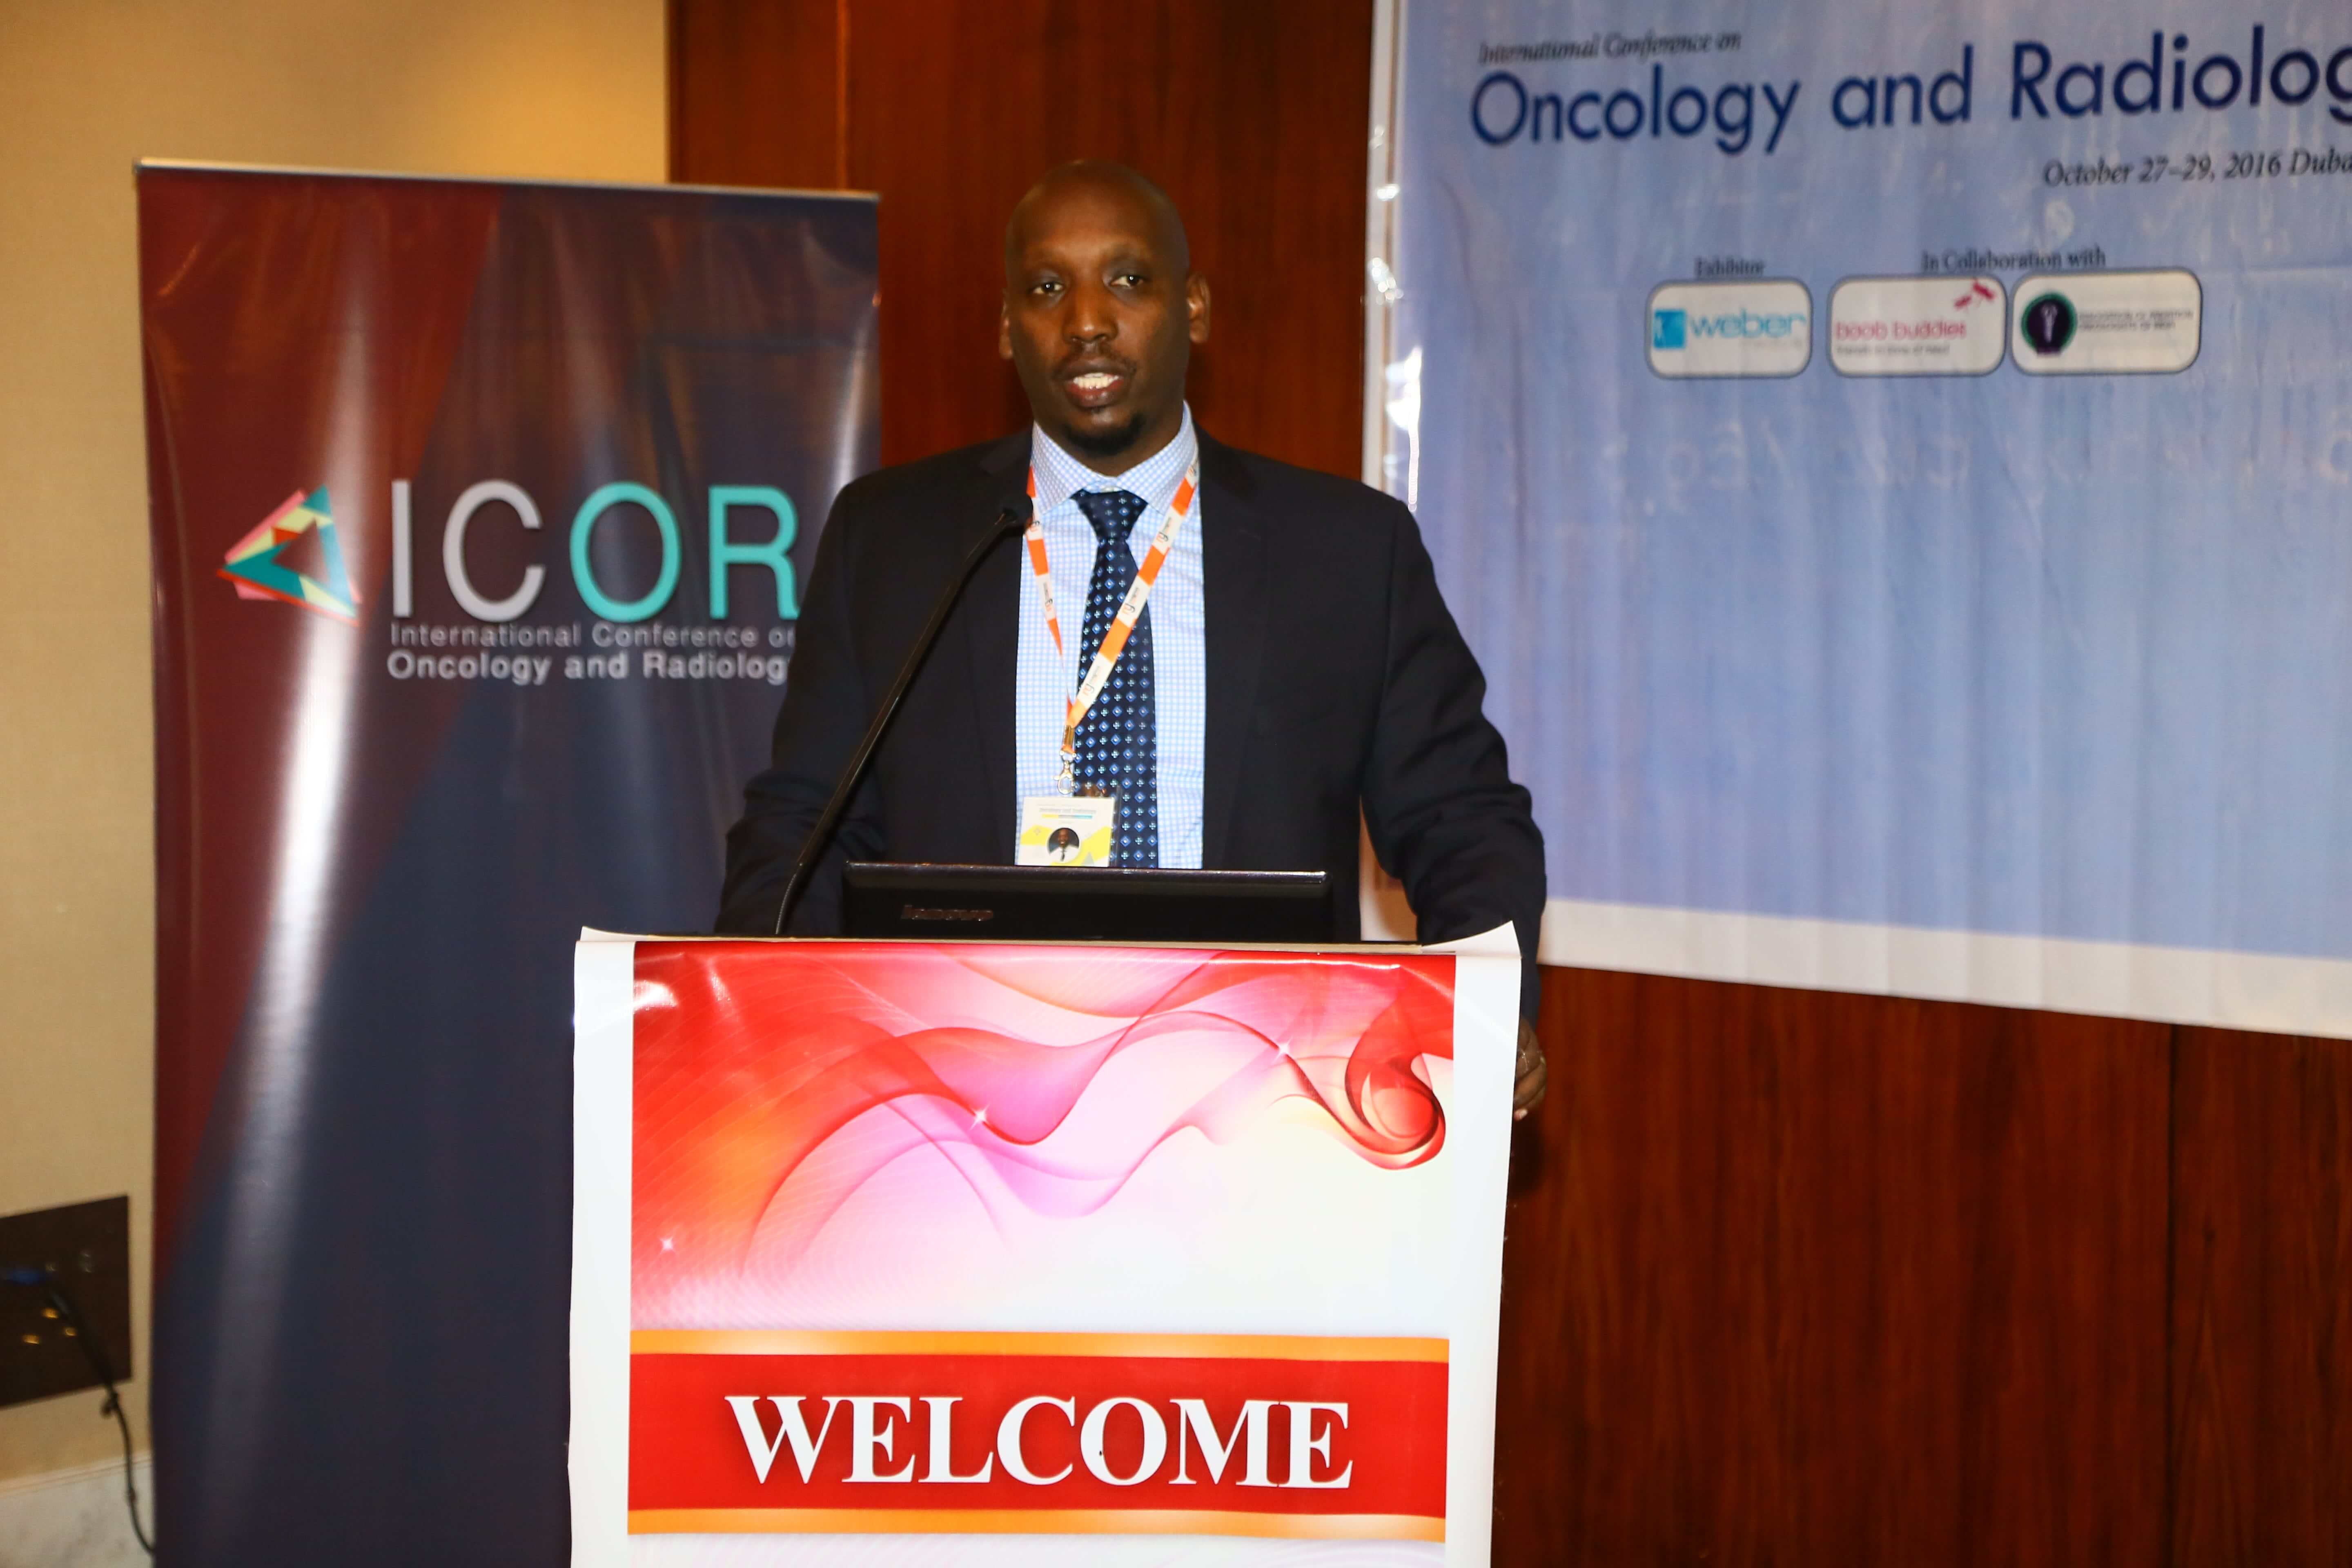 Cancer research conferences - Dr. Christian Ntizimira